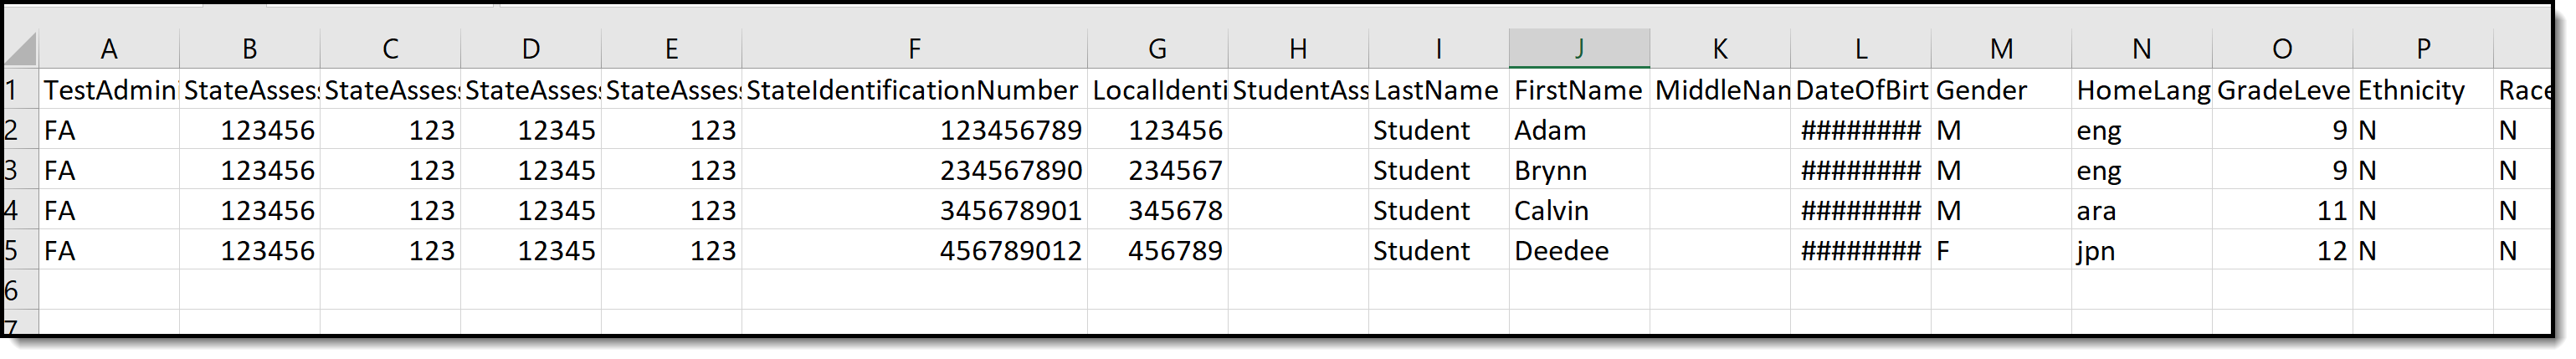 Image of the State Assessment Registration Extract in CSV Format.